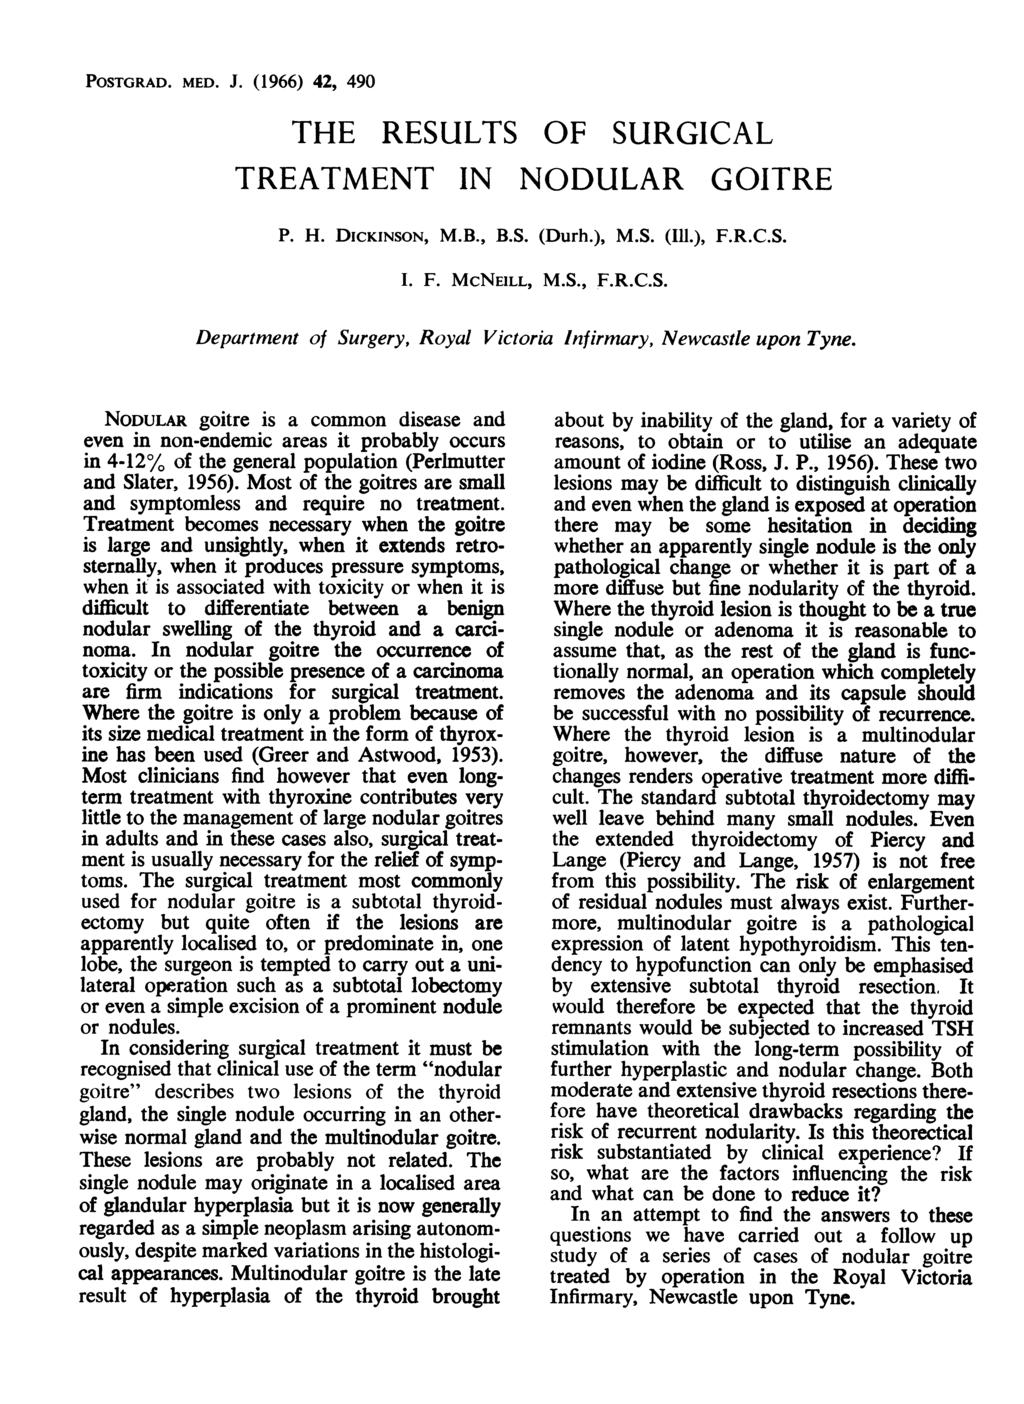 POSTGRAD. MED. J. (1966) 42, 490 THE RESULTS OF SURGICAL TREATMENT IN NODULAR GOITRE P. H. DICKINSON, M.B., B.S. (Durh.), M.S. (I11.), F.R.C.S. I. F. MCNEILL, M.S., F.R.C.S. Department of Surgery, Royal Victoria Infirmary, Newcastle upon Tyne.